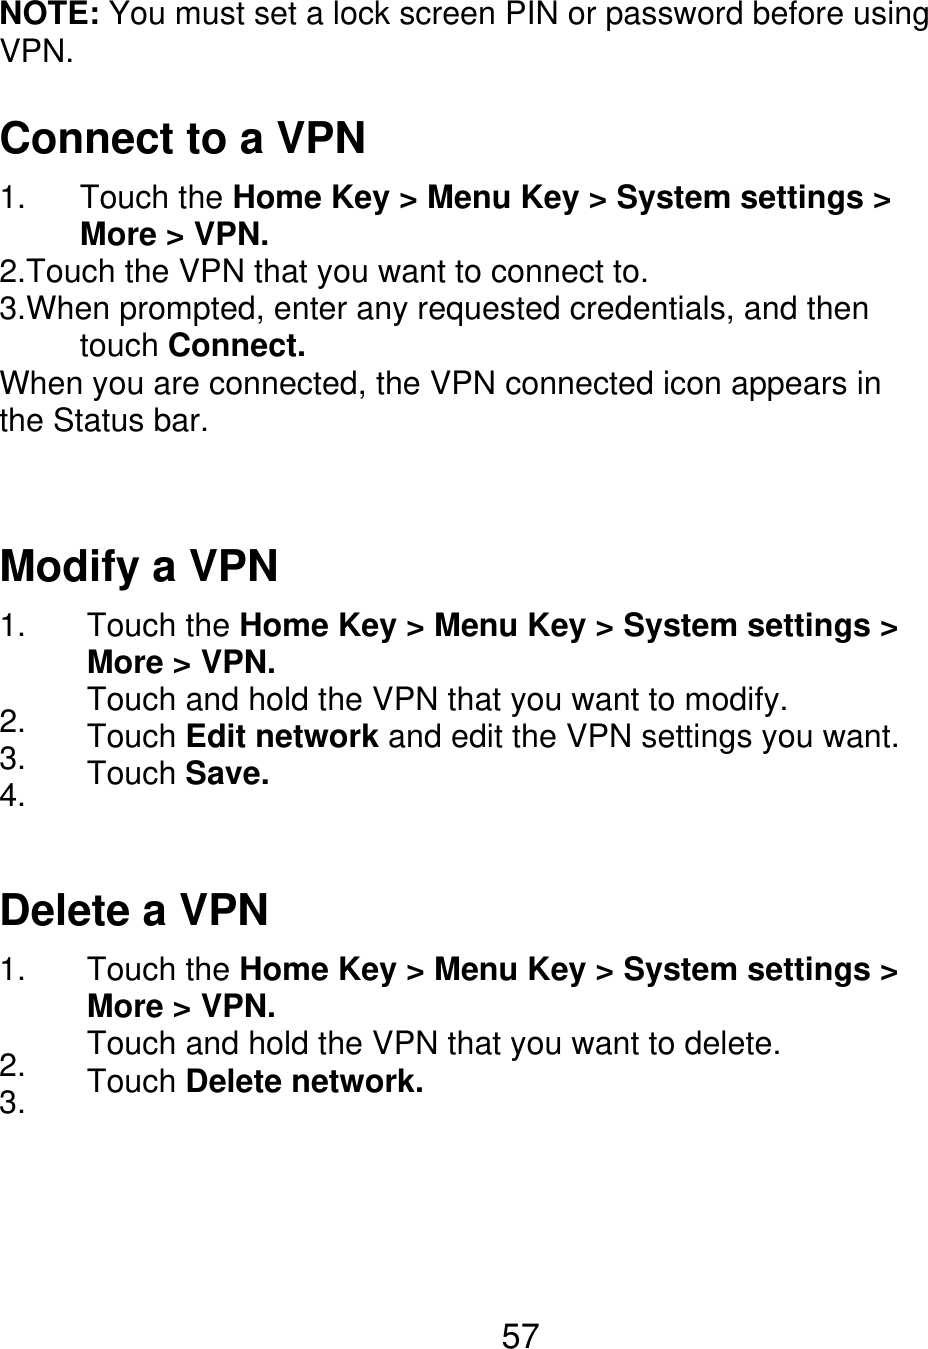 NOTE: You must set a lock screen PIN or password before using VPN. Connect to a VPN 1.      Touch the Home Key &gt; Menu Key &gt; System settings &gt;      More &gt; VPN. 2.Touch the VPN that you want to connect to. 3.When prompted, enter any requested credentials, and then      touch Connect. When you are connected, the VPN connected icon appears in the Status bar. Modify a VPN 1. 2. 3. 4. Touch the Home Key &gt; Menu Key &gt; System settings &gt; More &gt; VPN. Touch and hold the VPN that you want to modify. Touch Edit network and edit the VPN settings you want. Touch Save. Delete a VPN 1. 2. 3. Touch the Home Key &gt; Menu Key &gt; System settings &gt; More &gt; VPN. Touch and hold the VPN that you want to delete. Touch Delete network. 57 